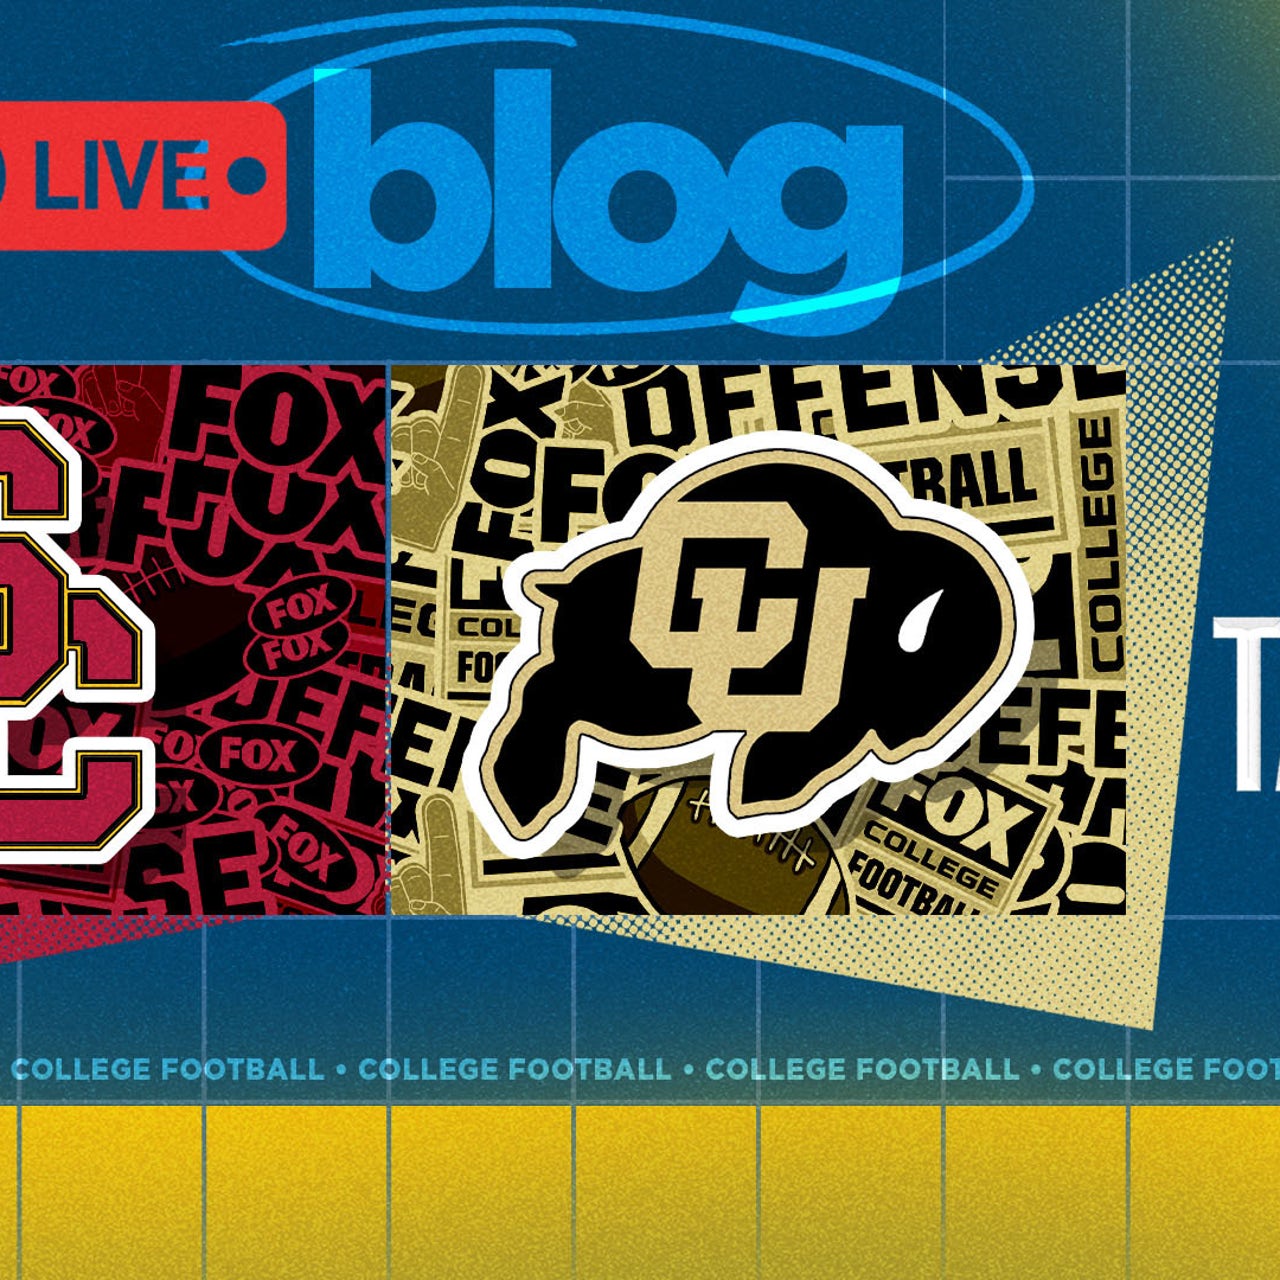 Big Noon Live Tailgate Buffs rally late, but USC holds on for 48-41 win FOX Sports